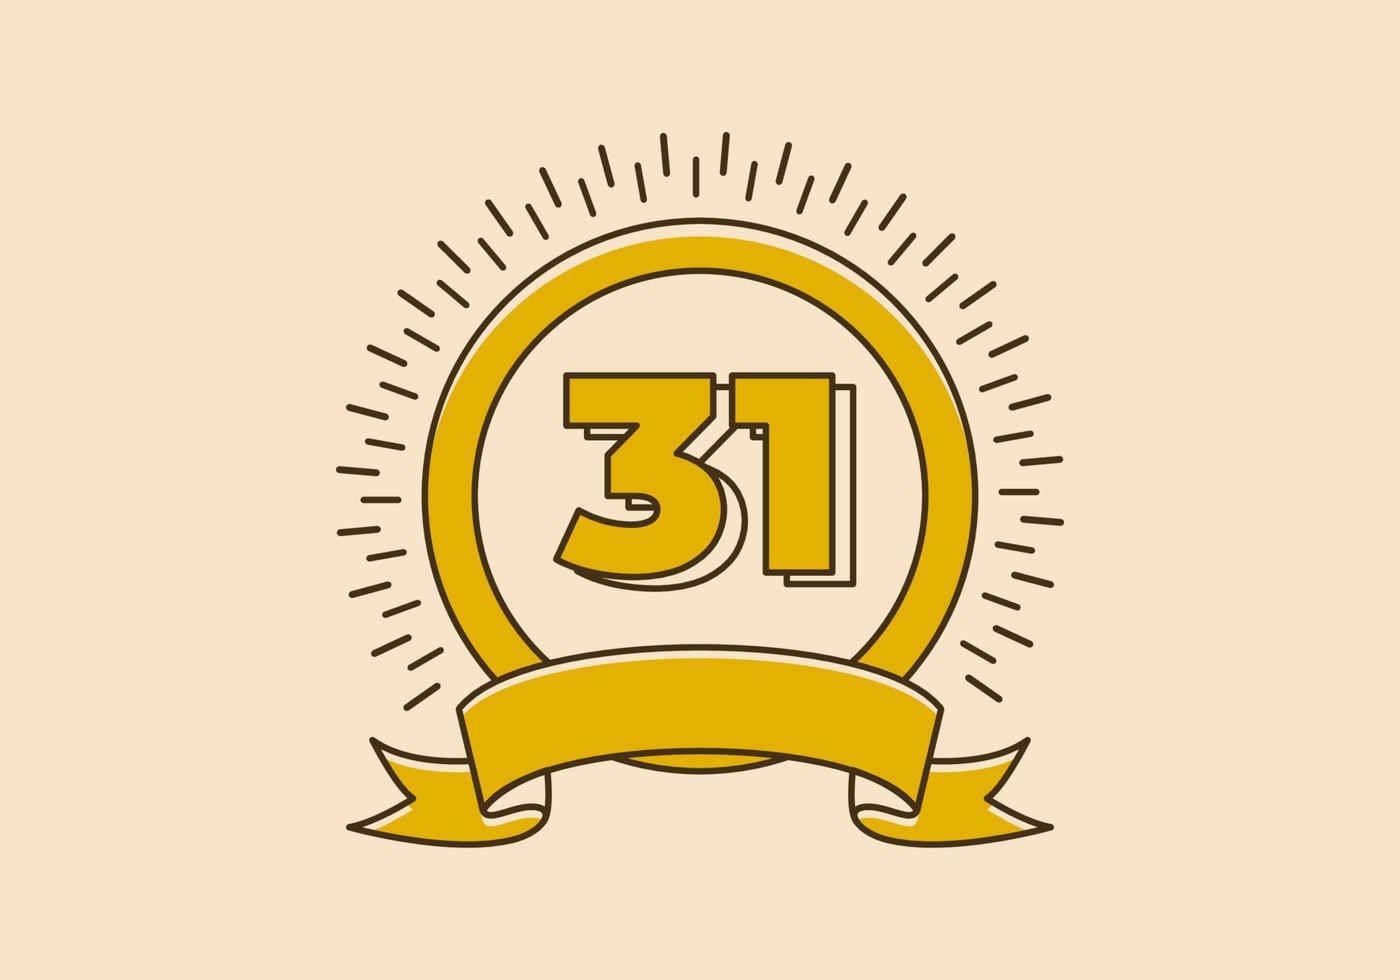 Vintage yellow circle badge with number 31 on it vector